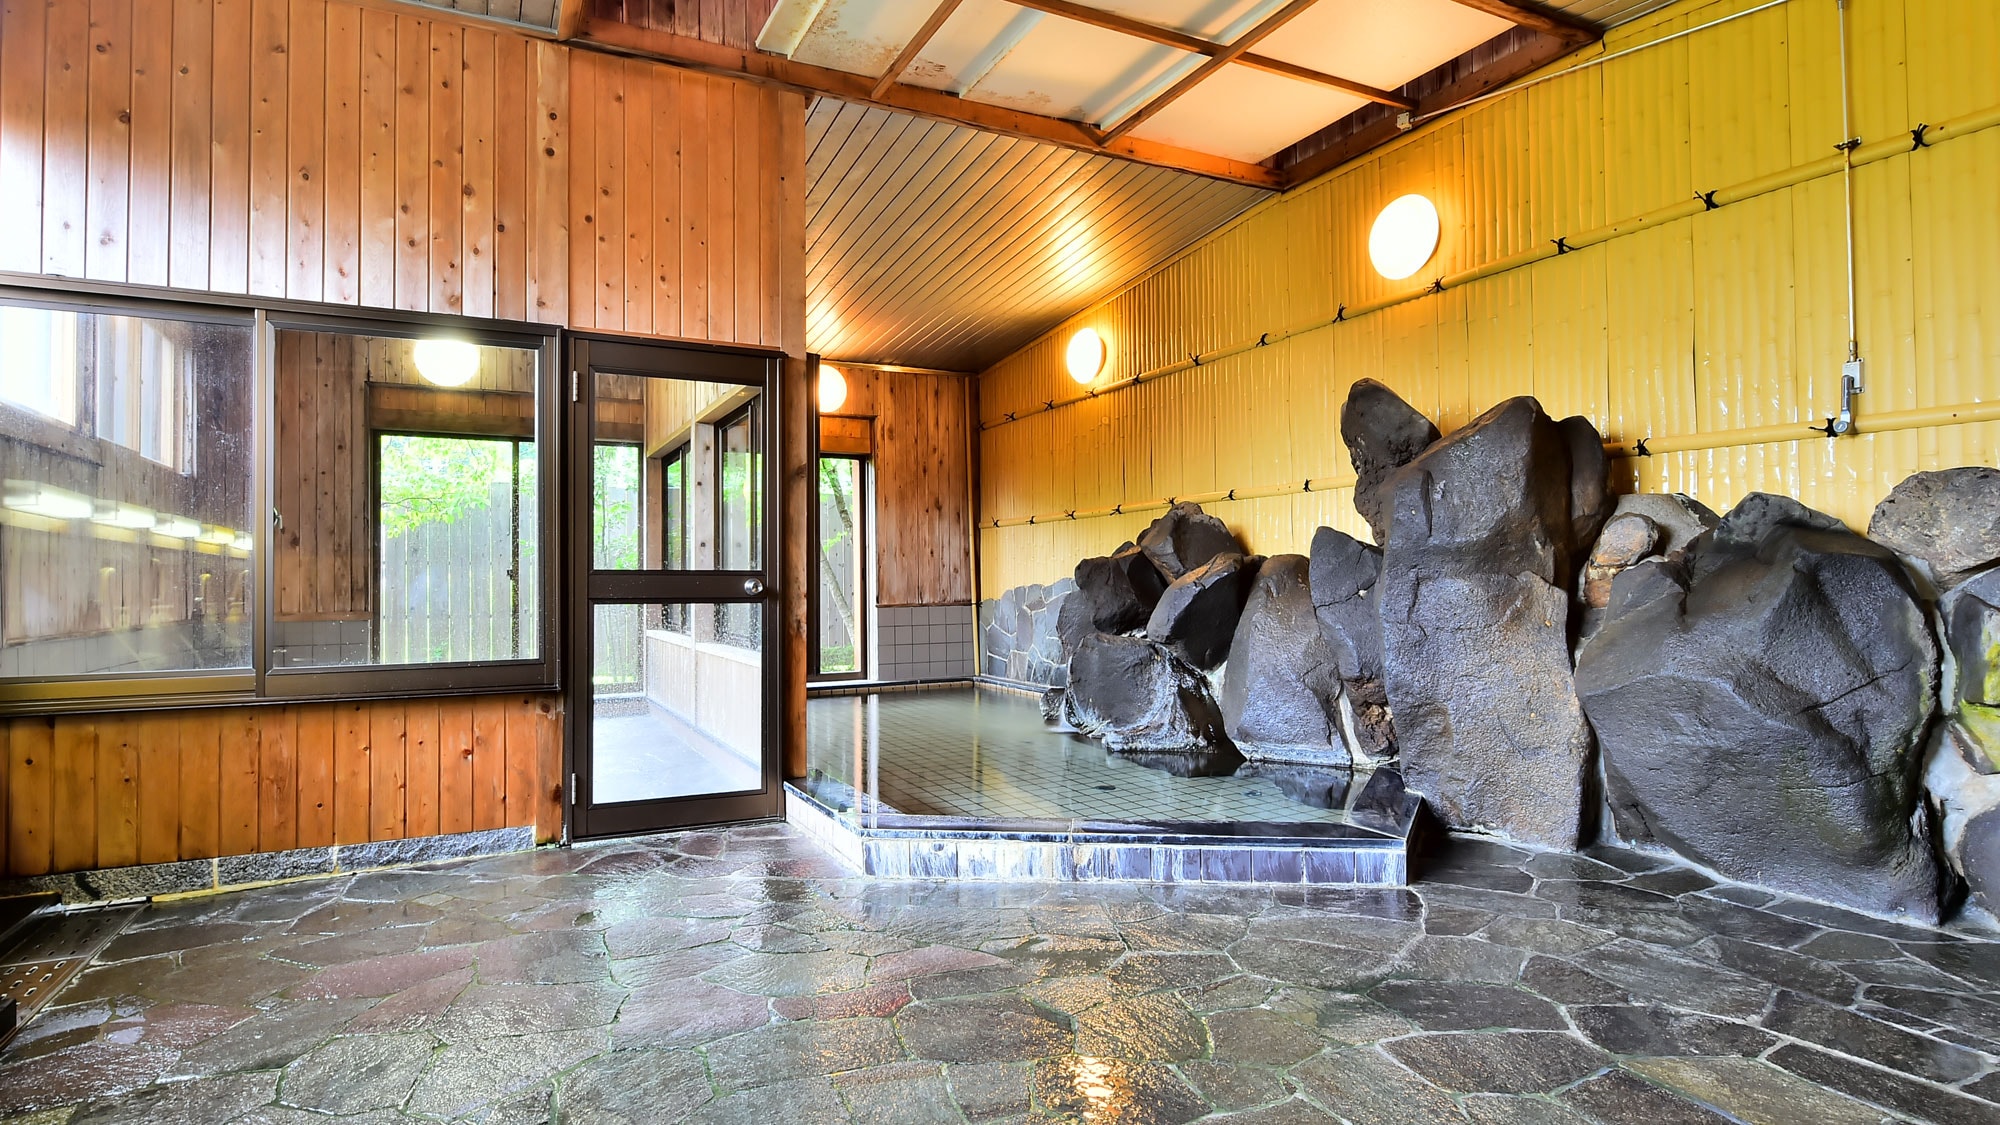 ●It is a beautiful skin hot spring of Omachi hot spring village where you can relax.